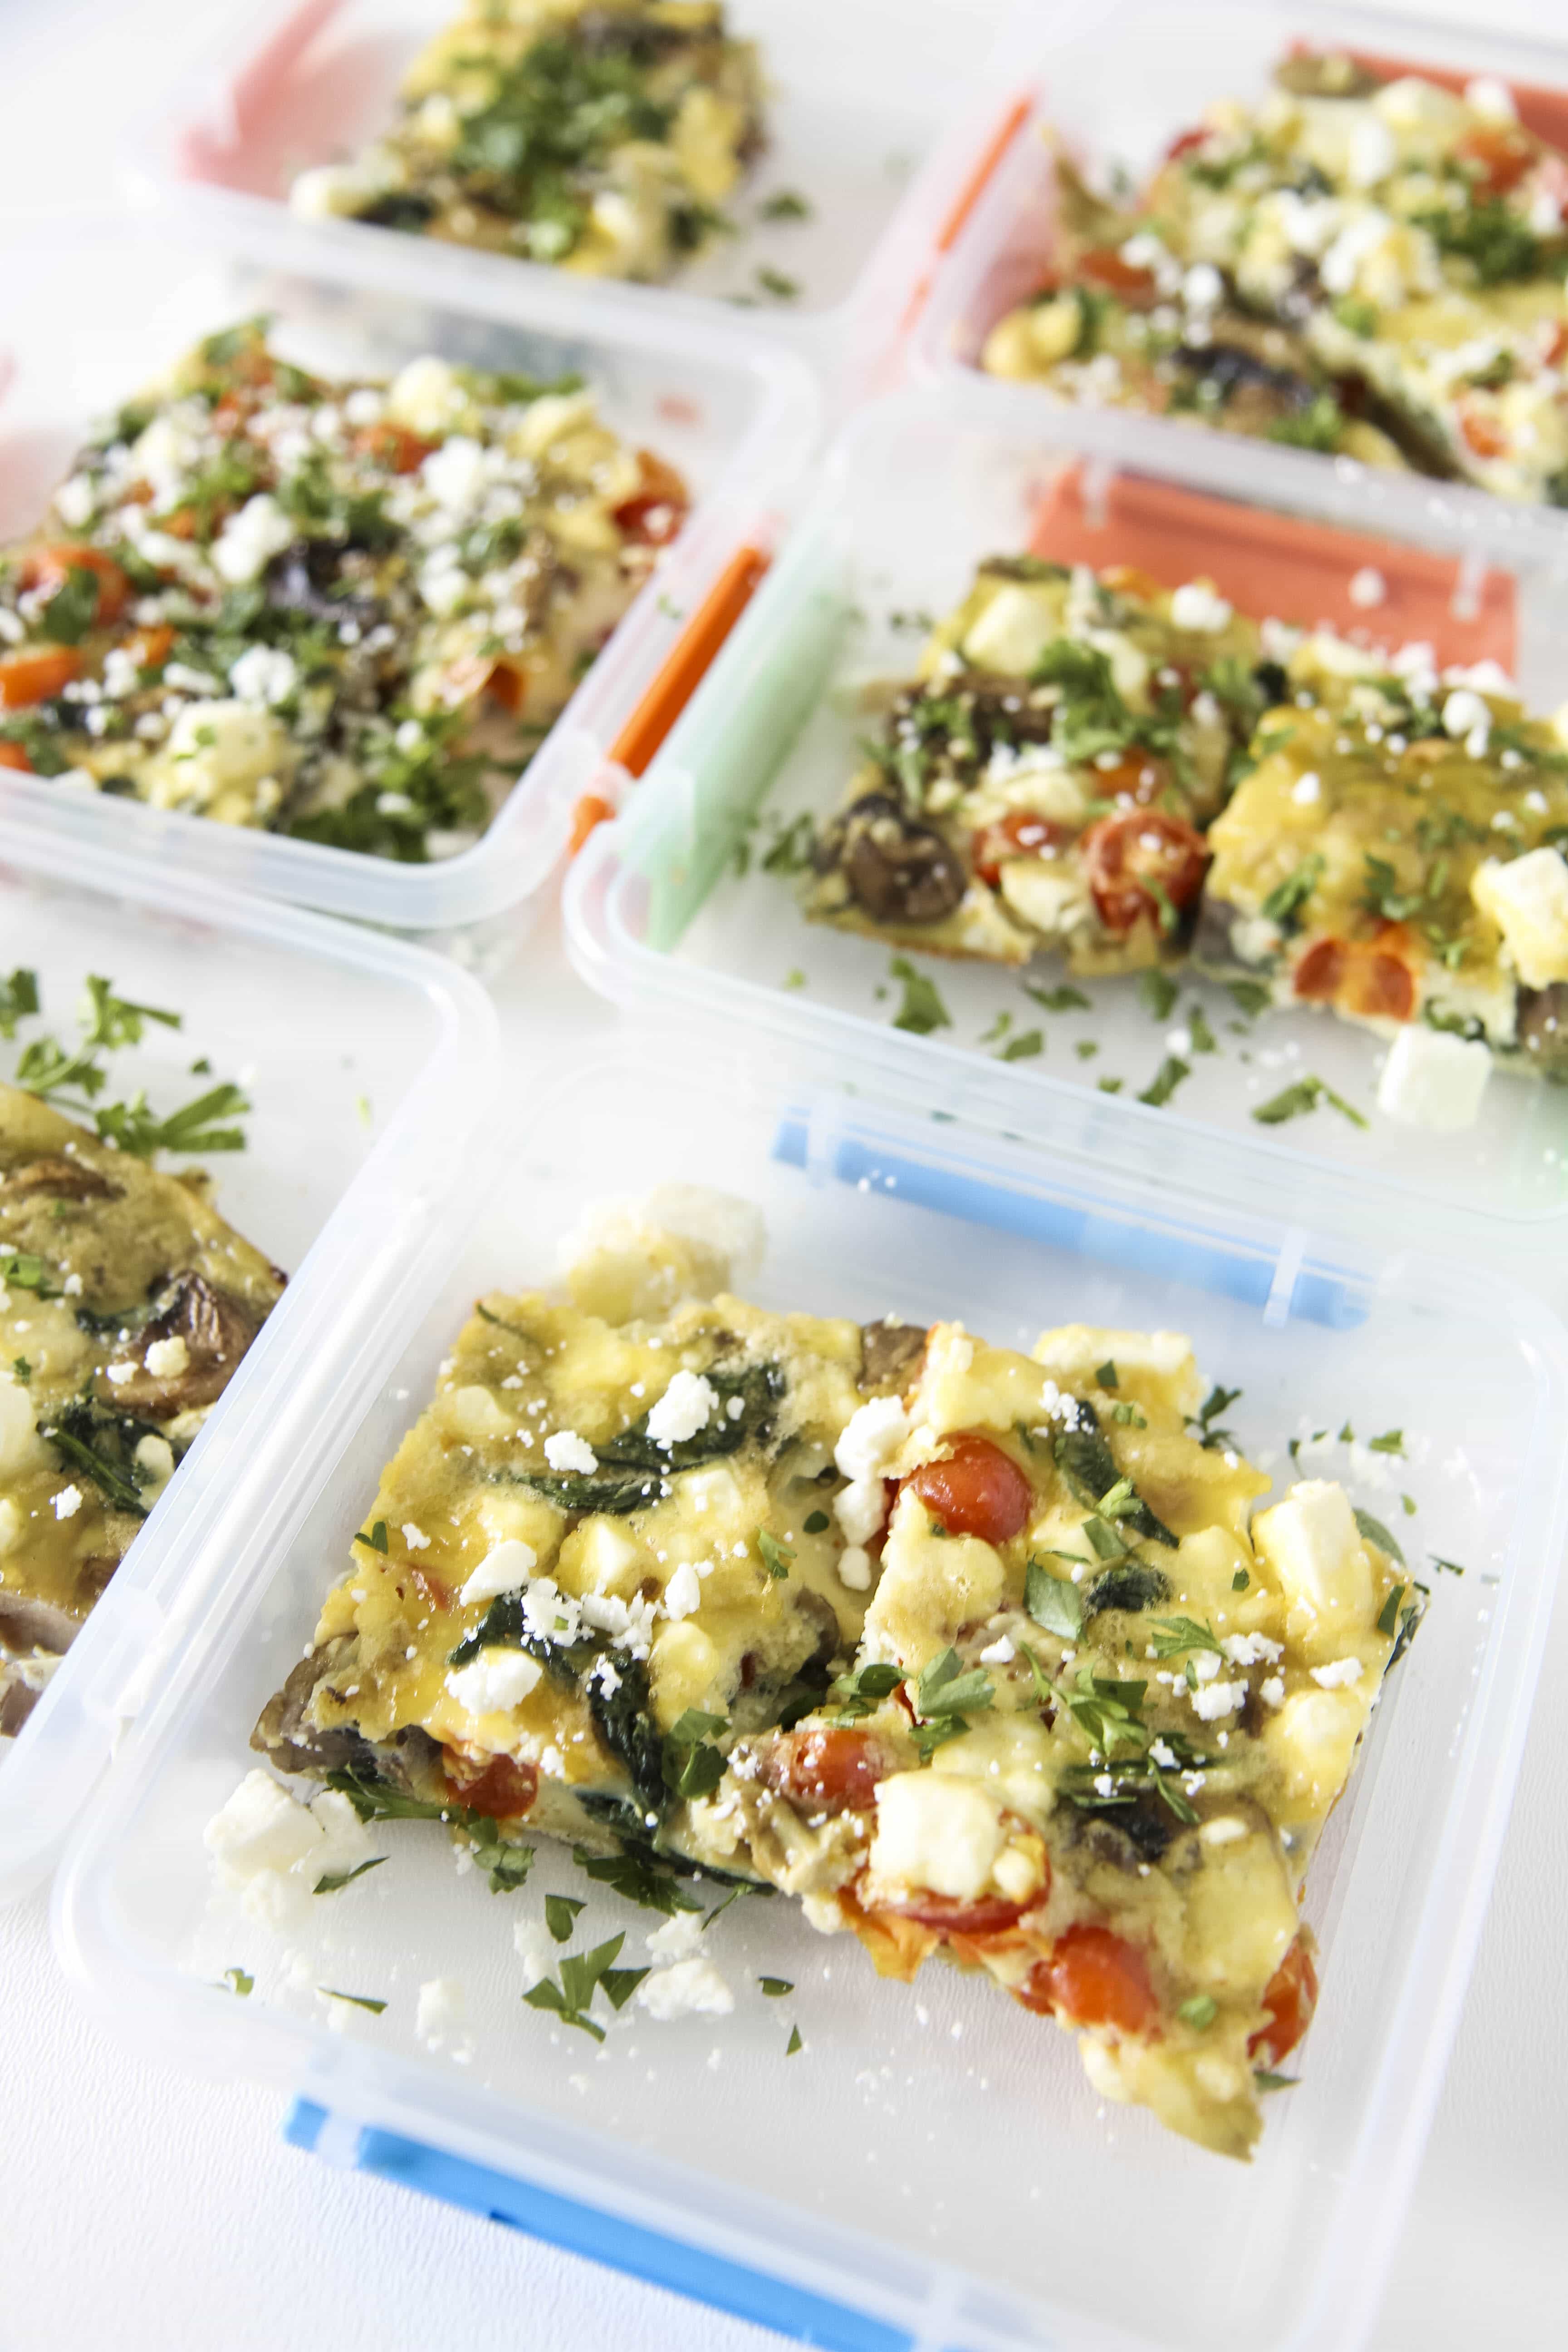 back-to-school lunch prep ideas from momadvice.com